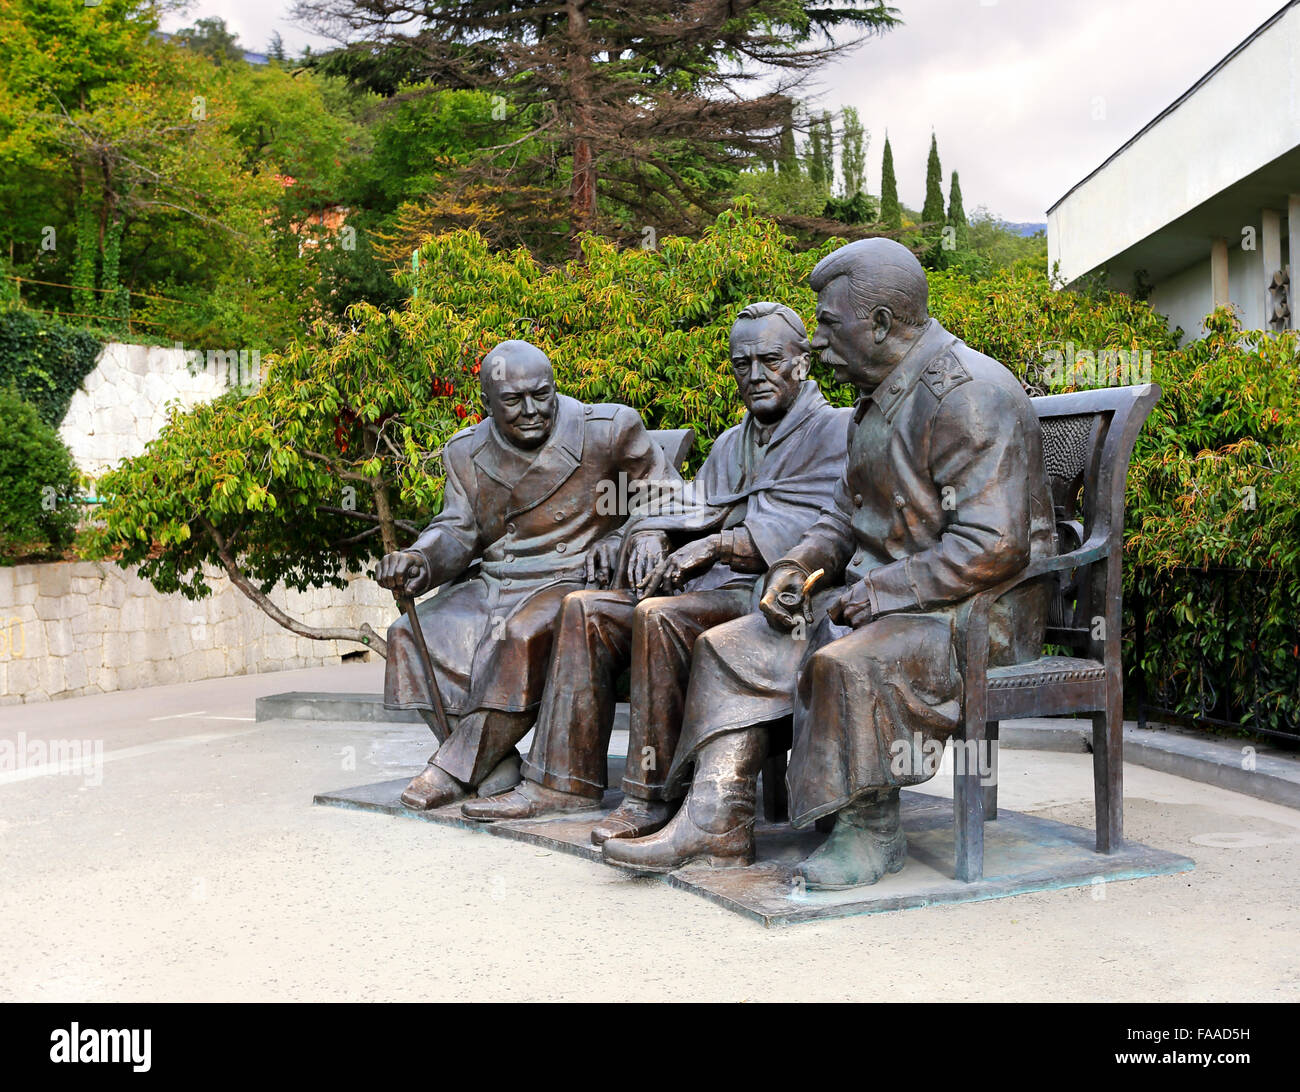 Monument to the 'Big three' in bronze with figures of Stalin, Roosevelt and Churchill in Yalta Stock Photo